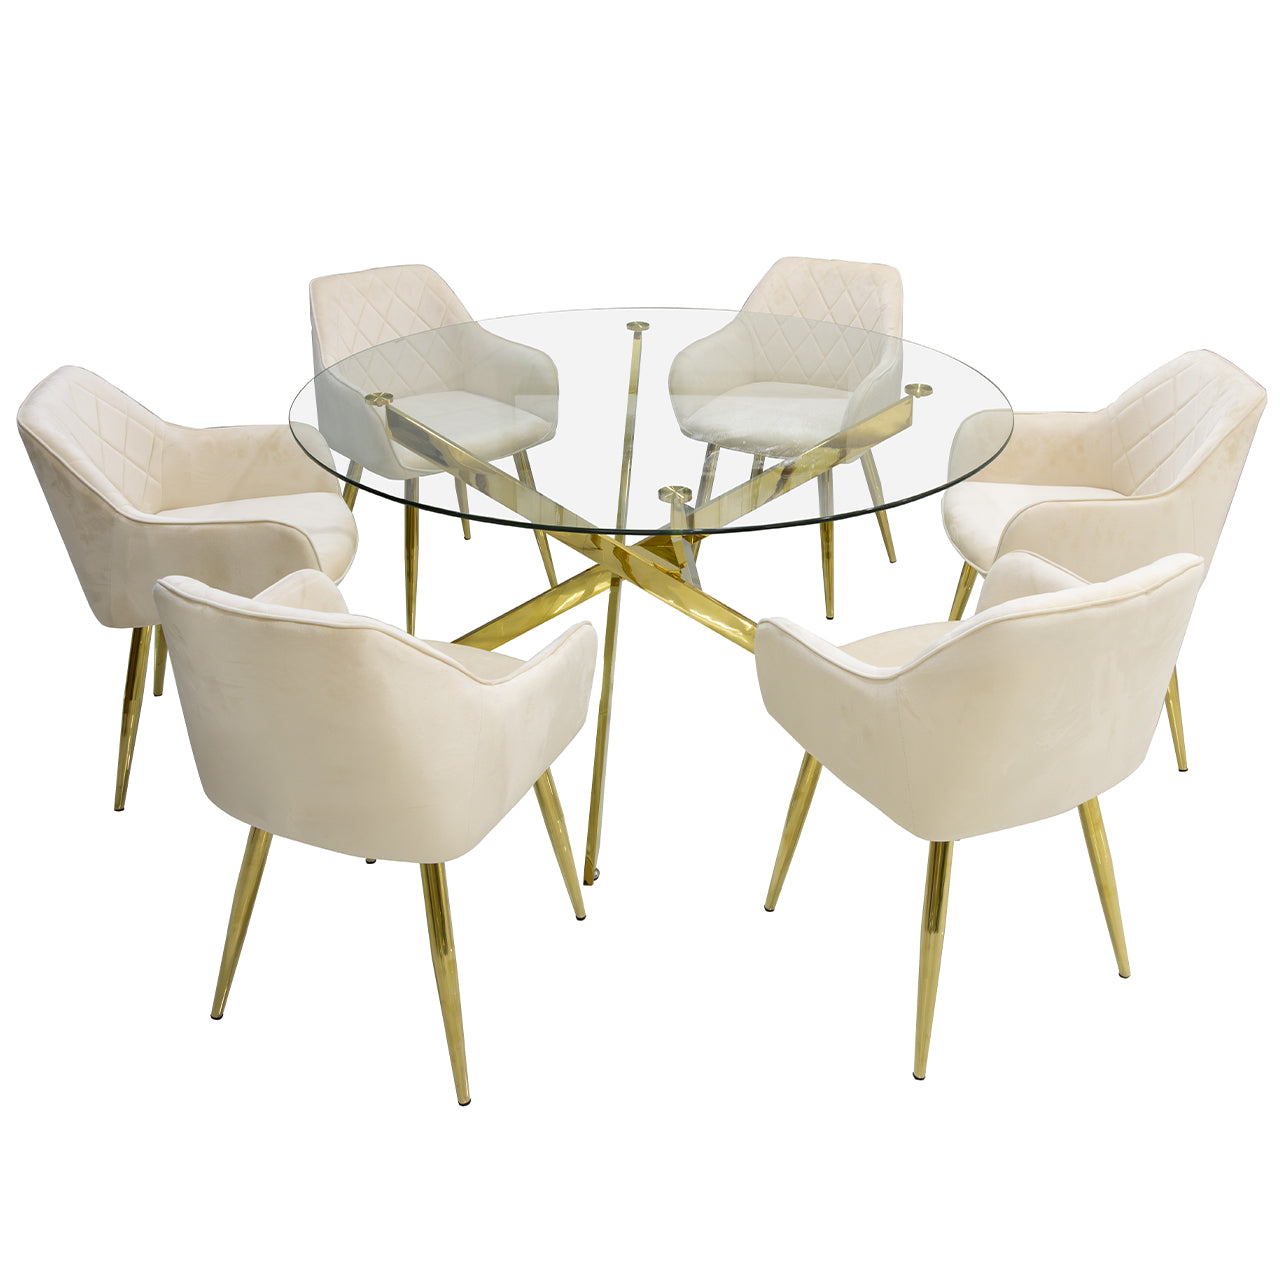 round dining table set of 6